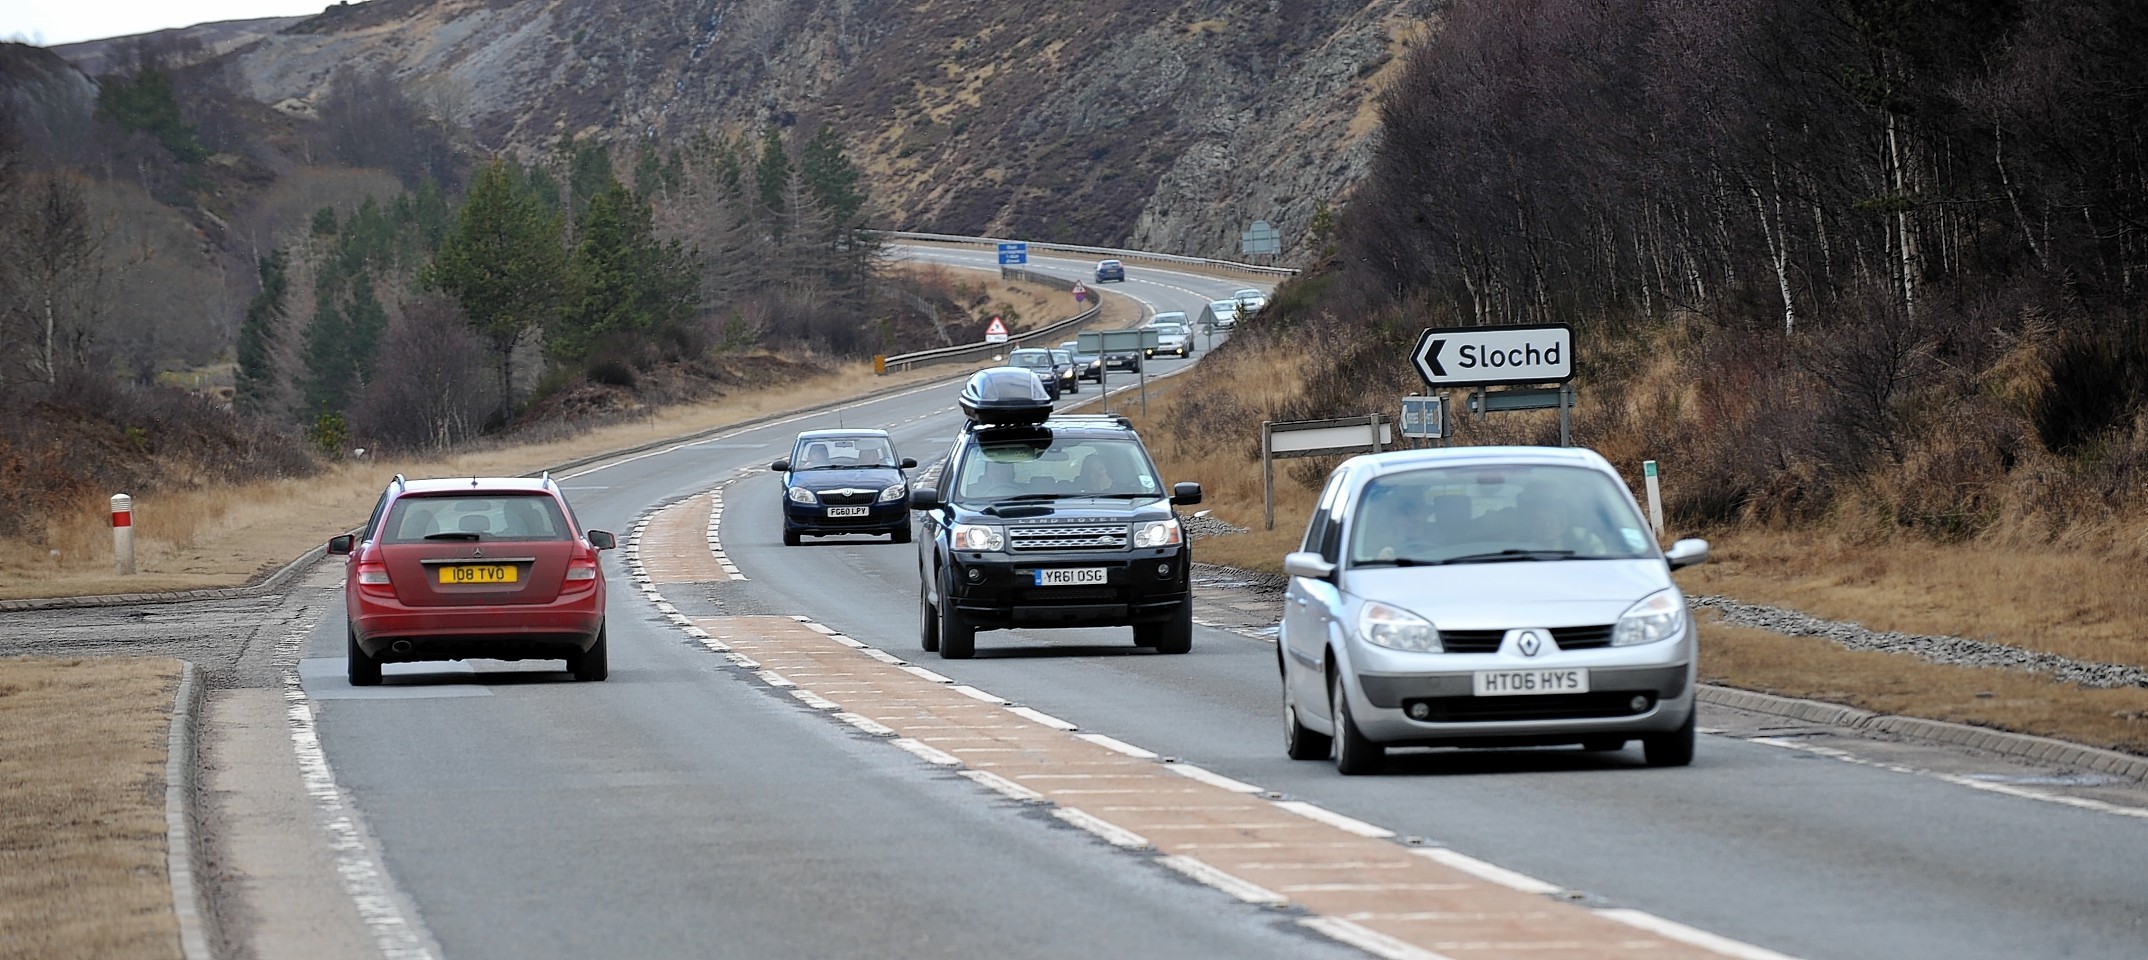 Traffic was slowing on the A9 at Slochd.